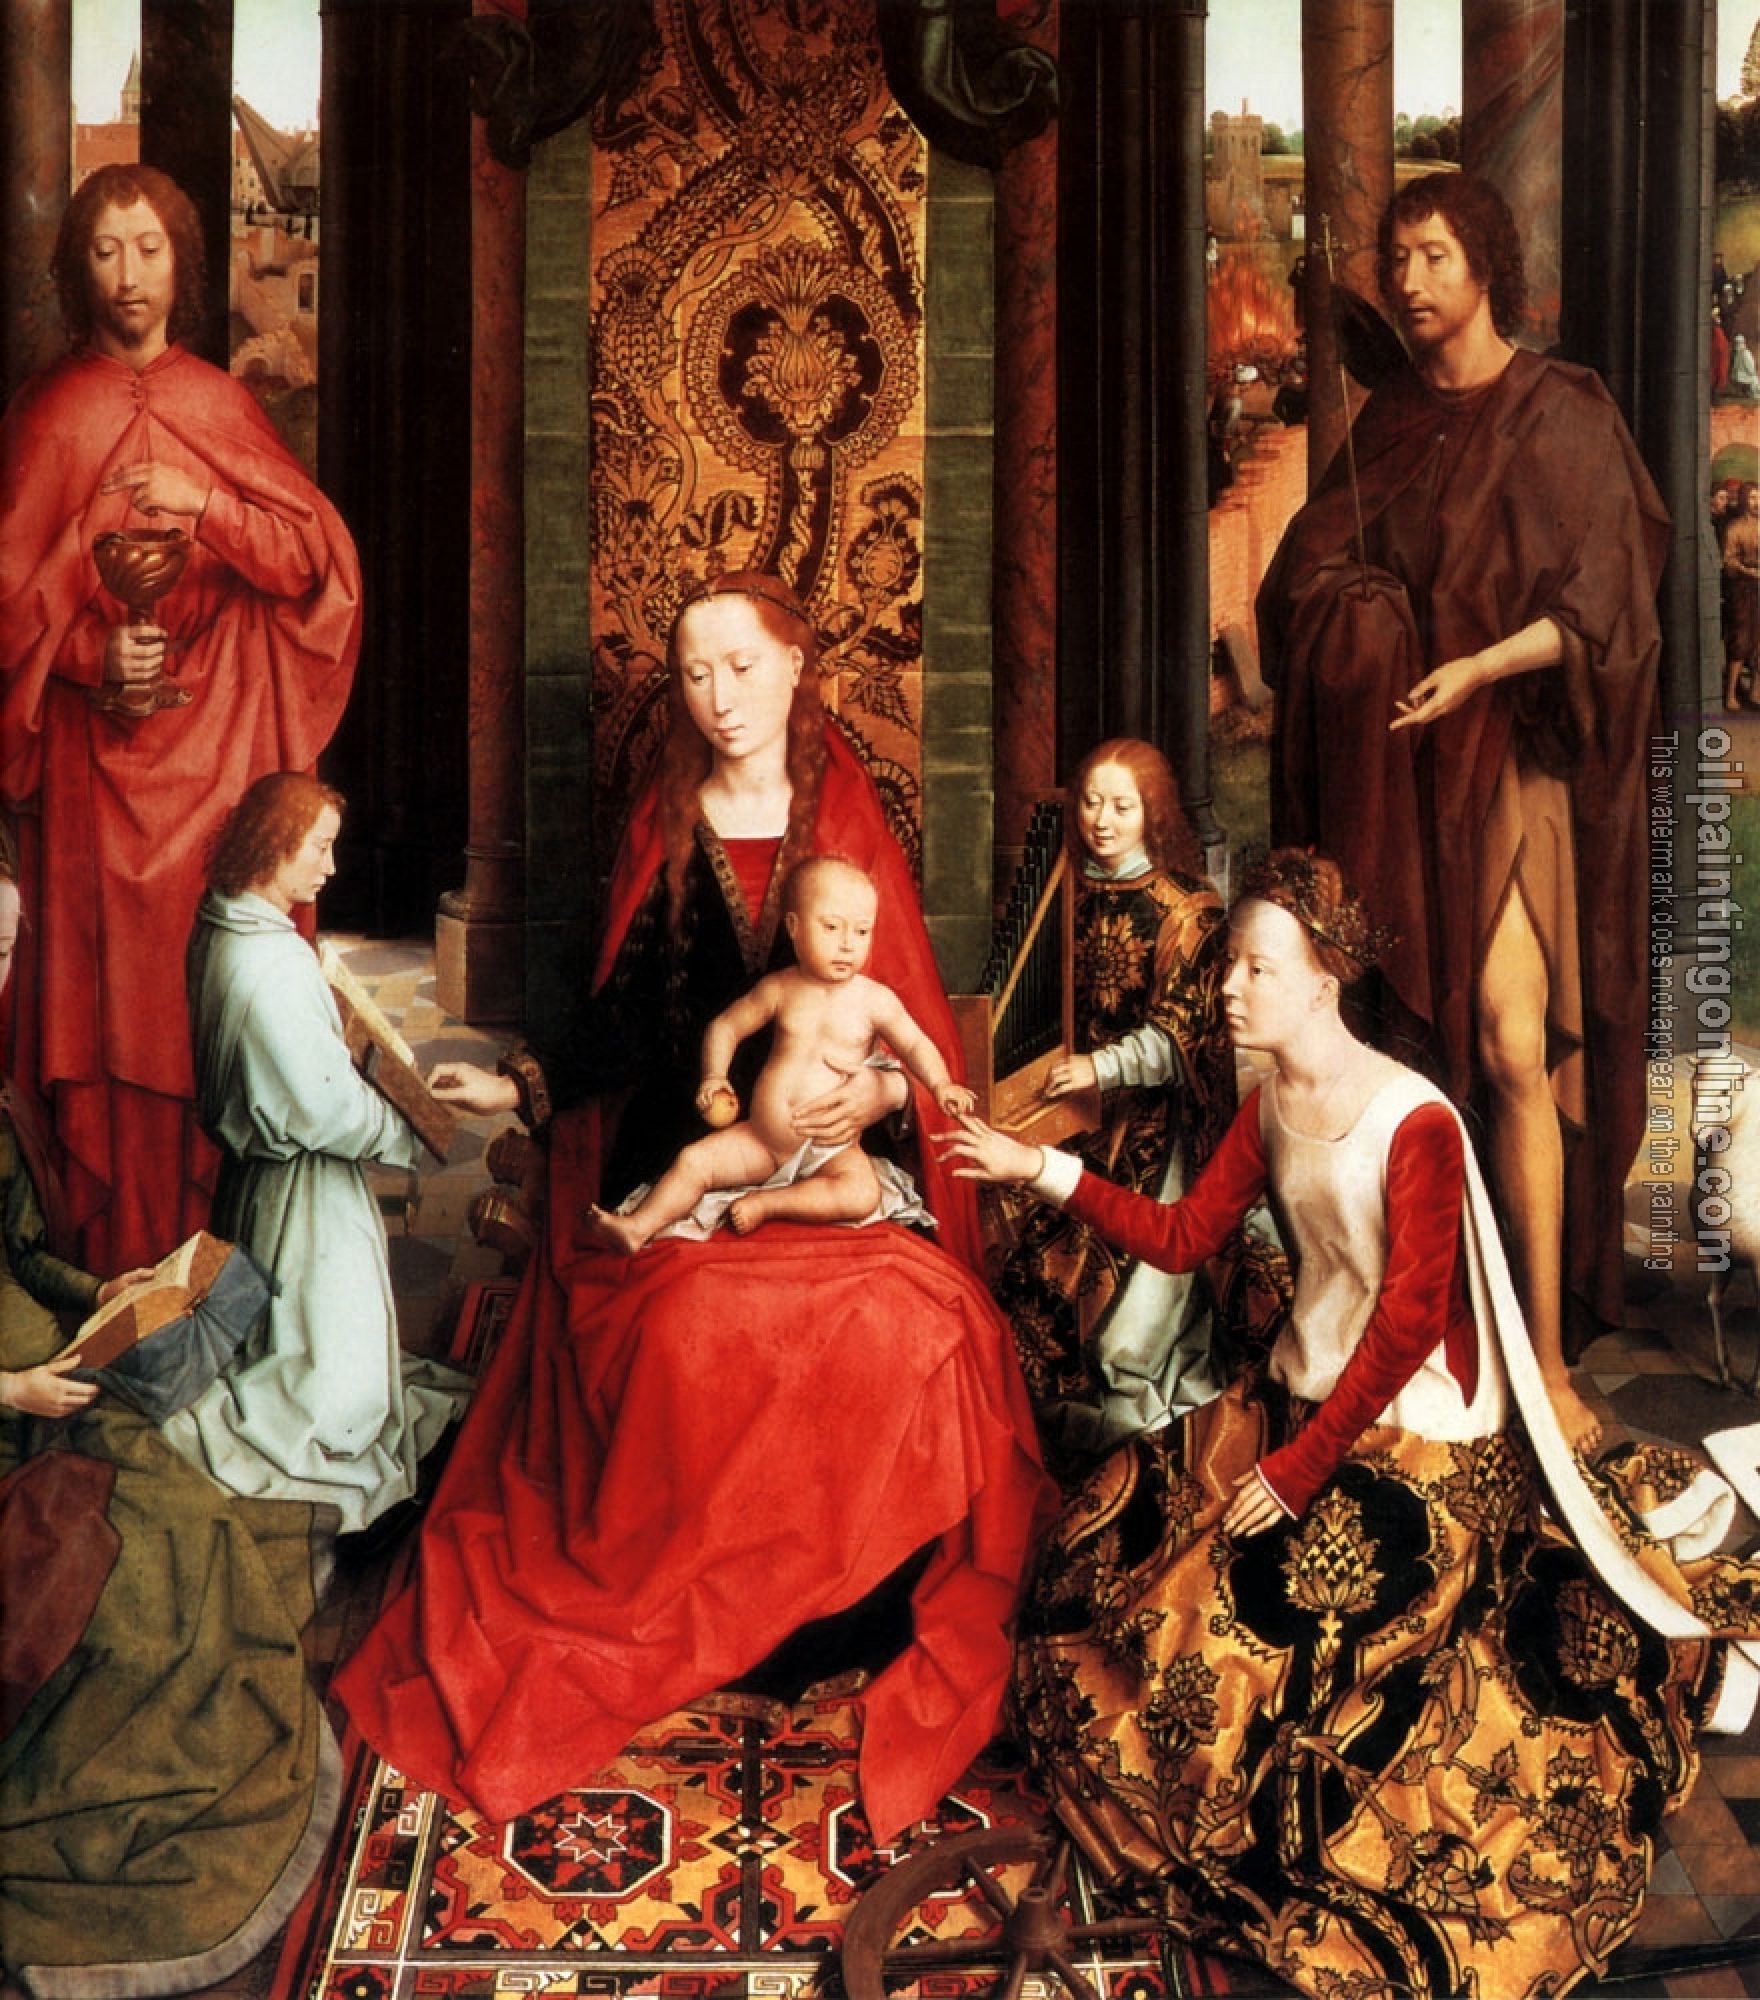 Memling, Hans - Marriage of St Catherine